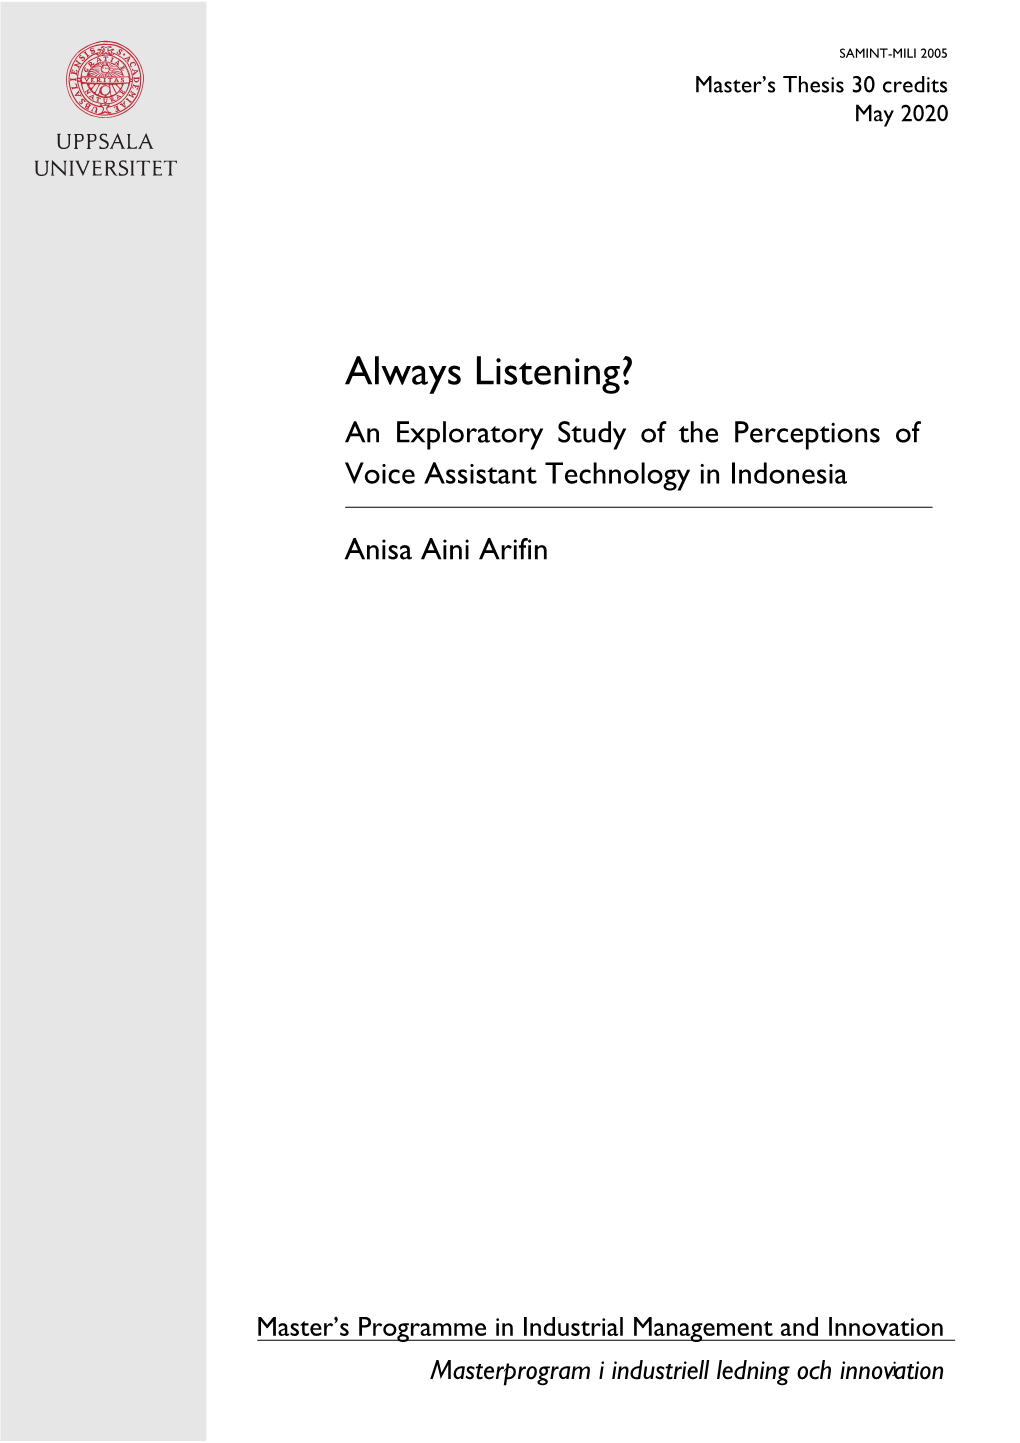 Always Listening? an Exploratory Study of the Perceptions of Voice Assistant Technology in Indonesia